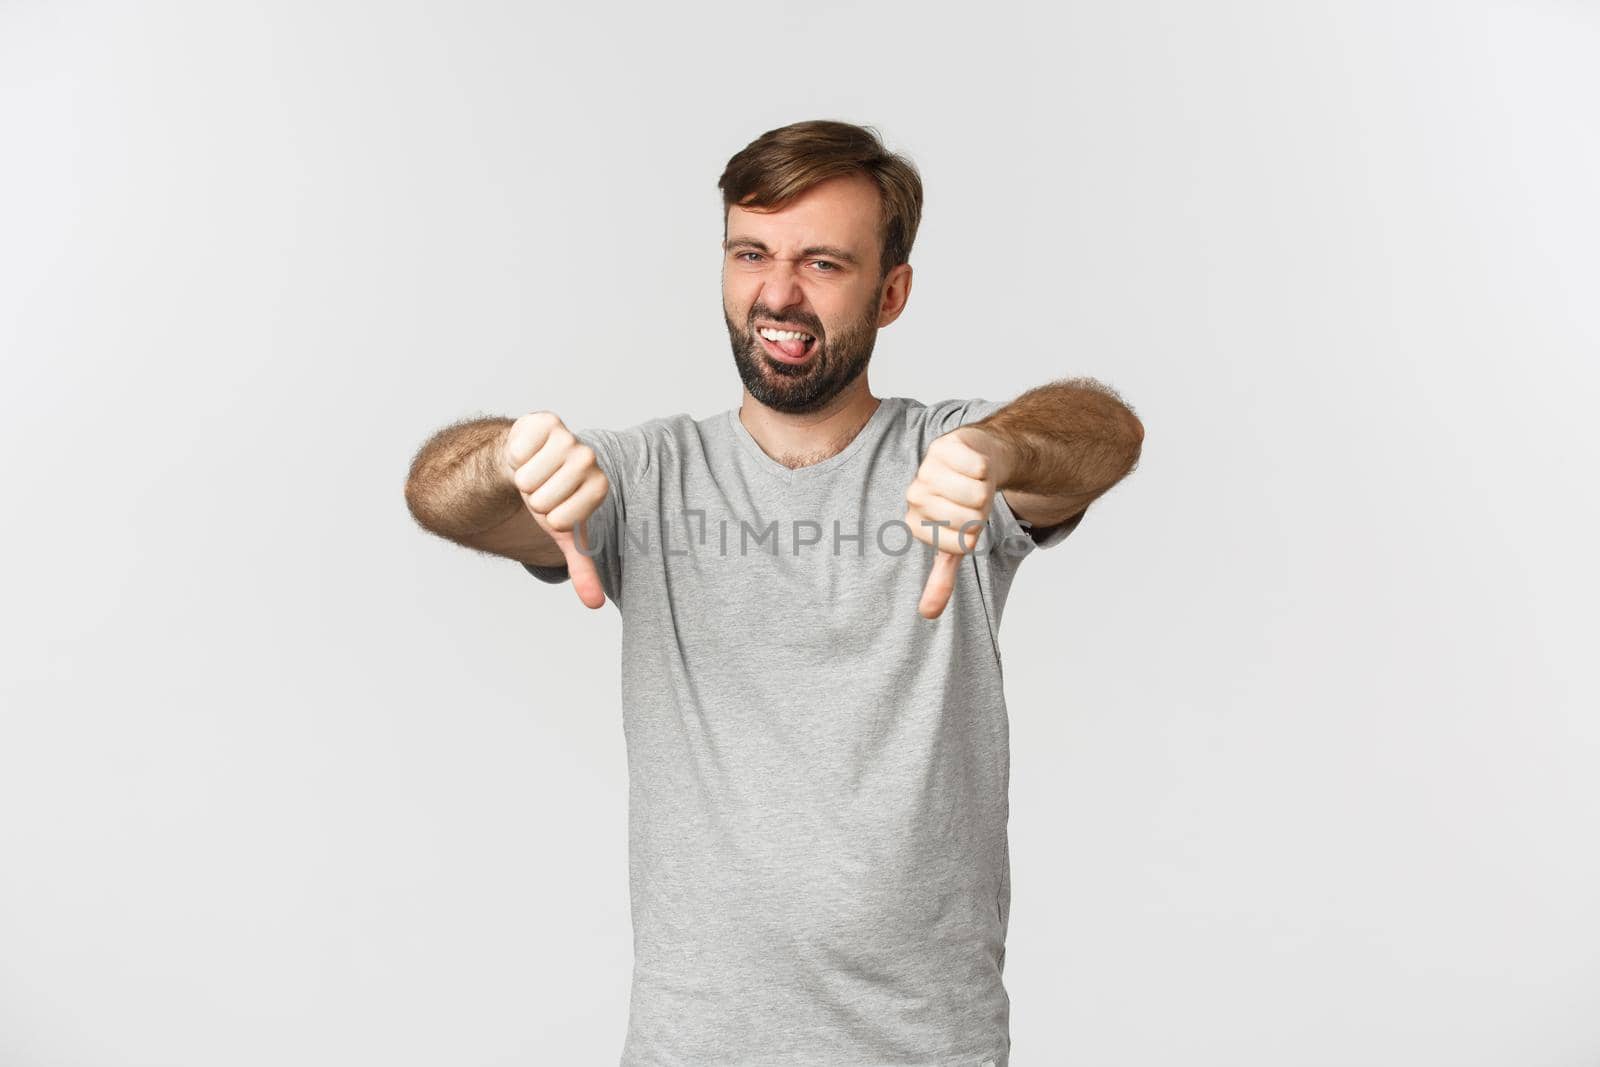 Portrait of skeptical bearded man in casual t-shirt, showing thumbs-down and looking disappointed, disapprove something bad, standing over white background.